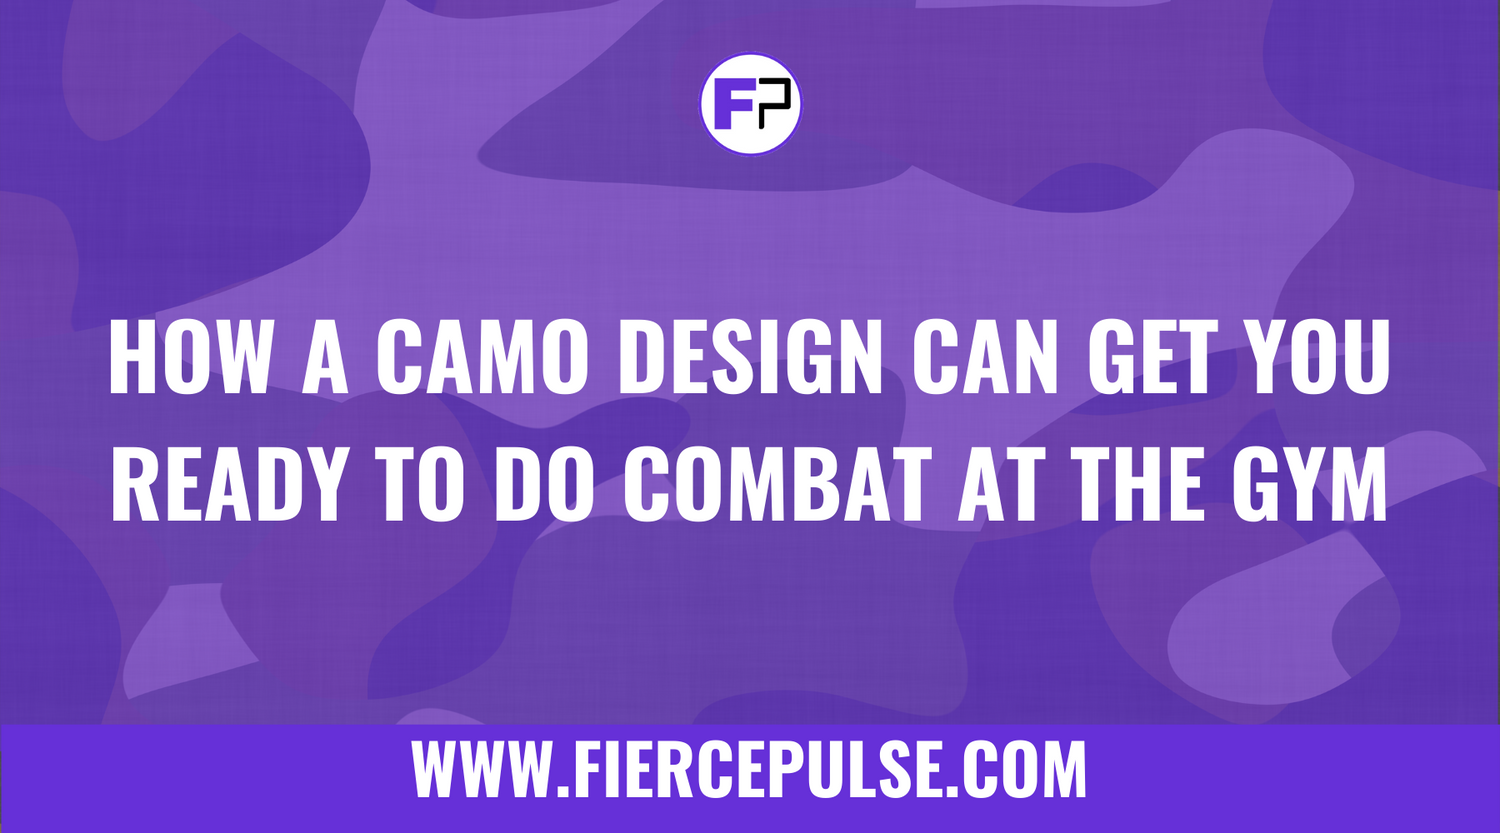 How a Camo Design Can Get You Ready to Do Combat at the Gym